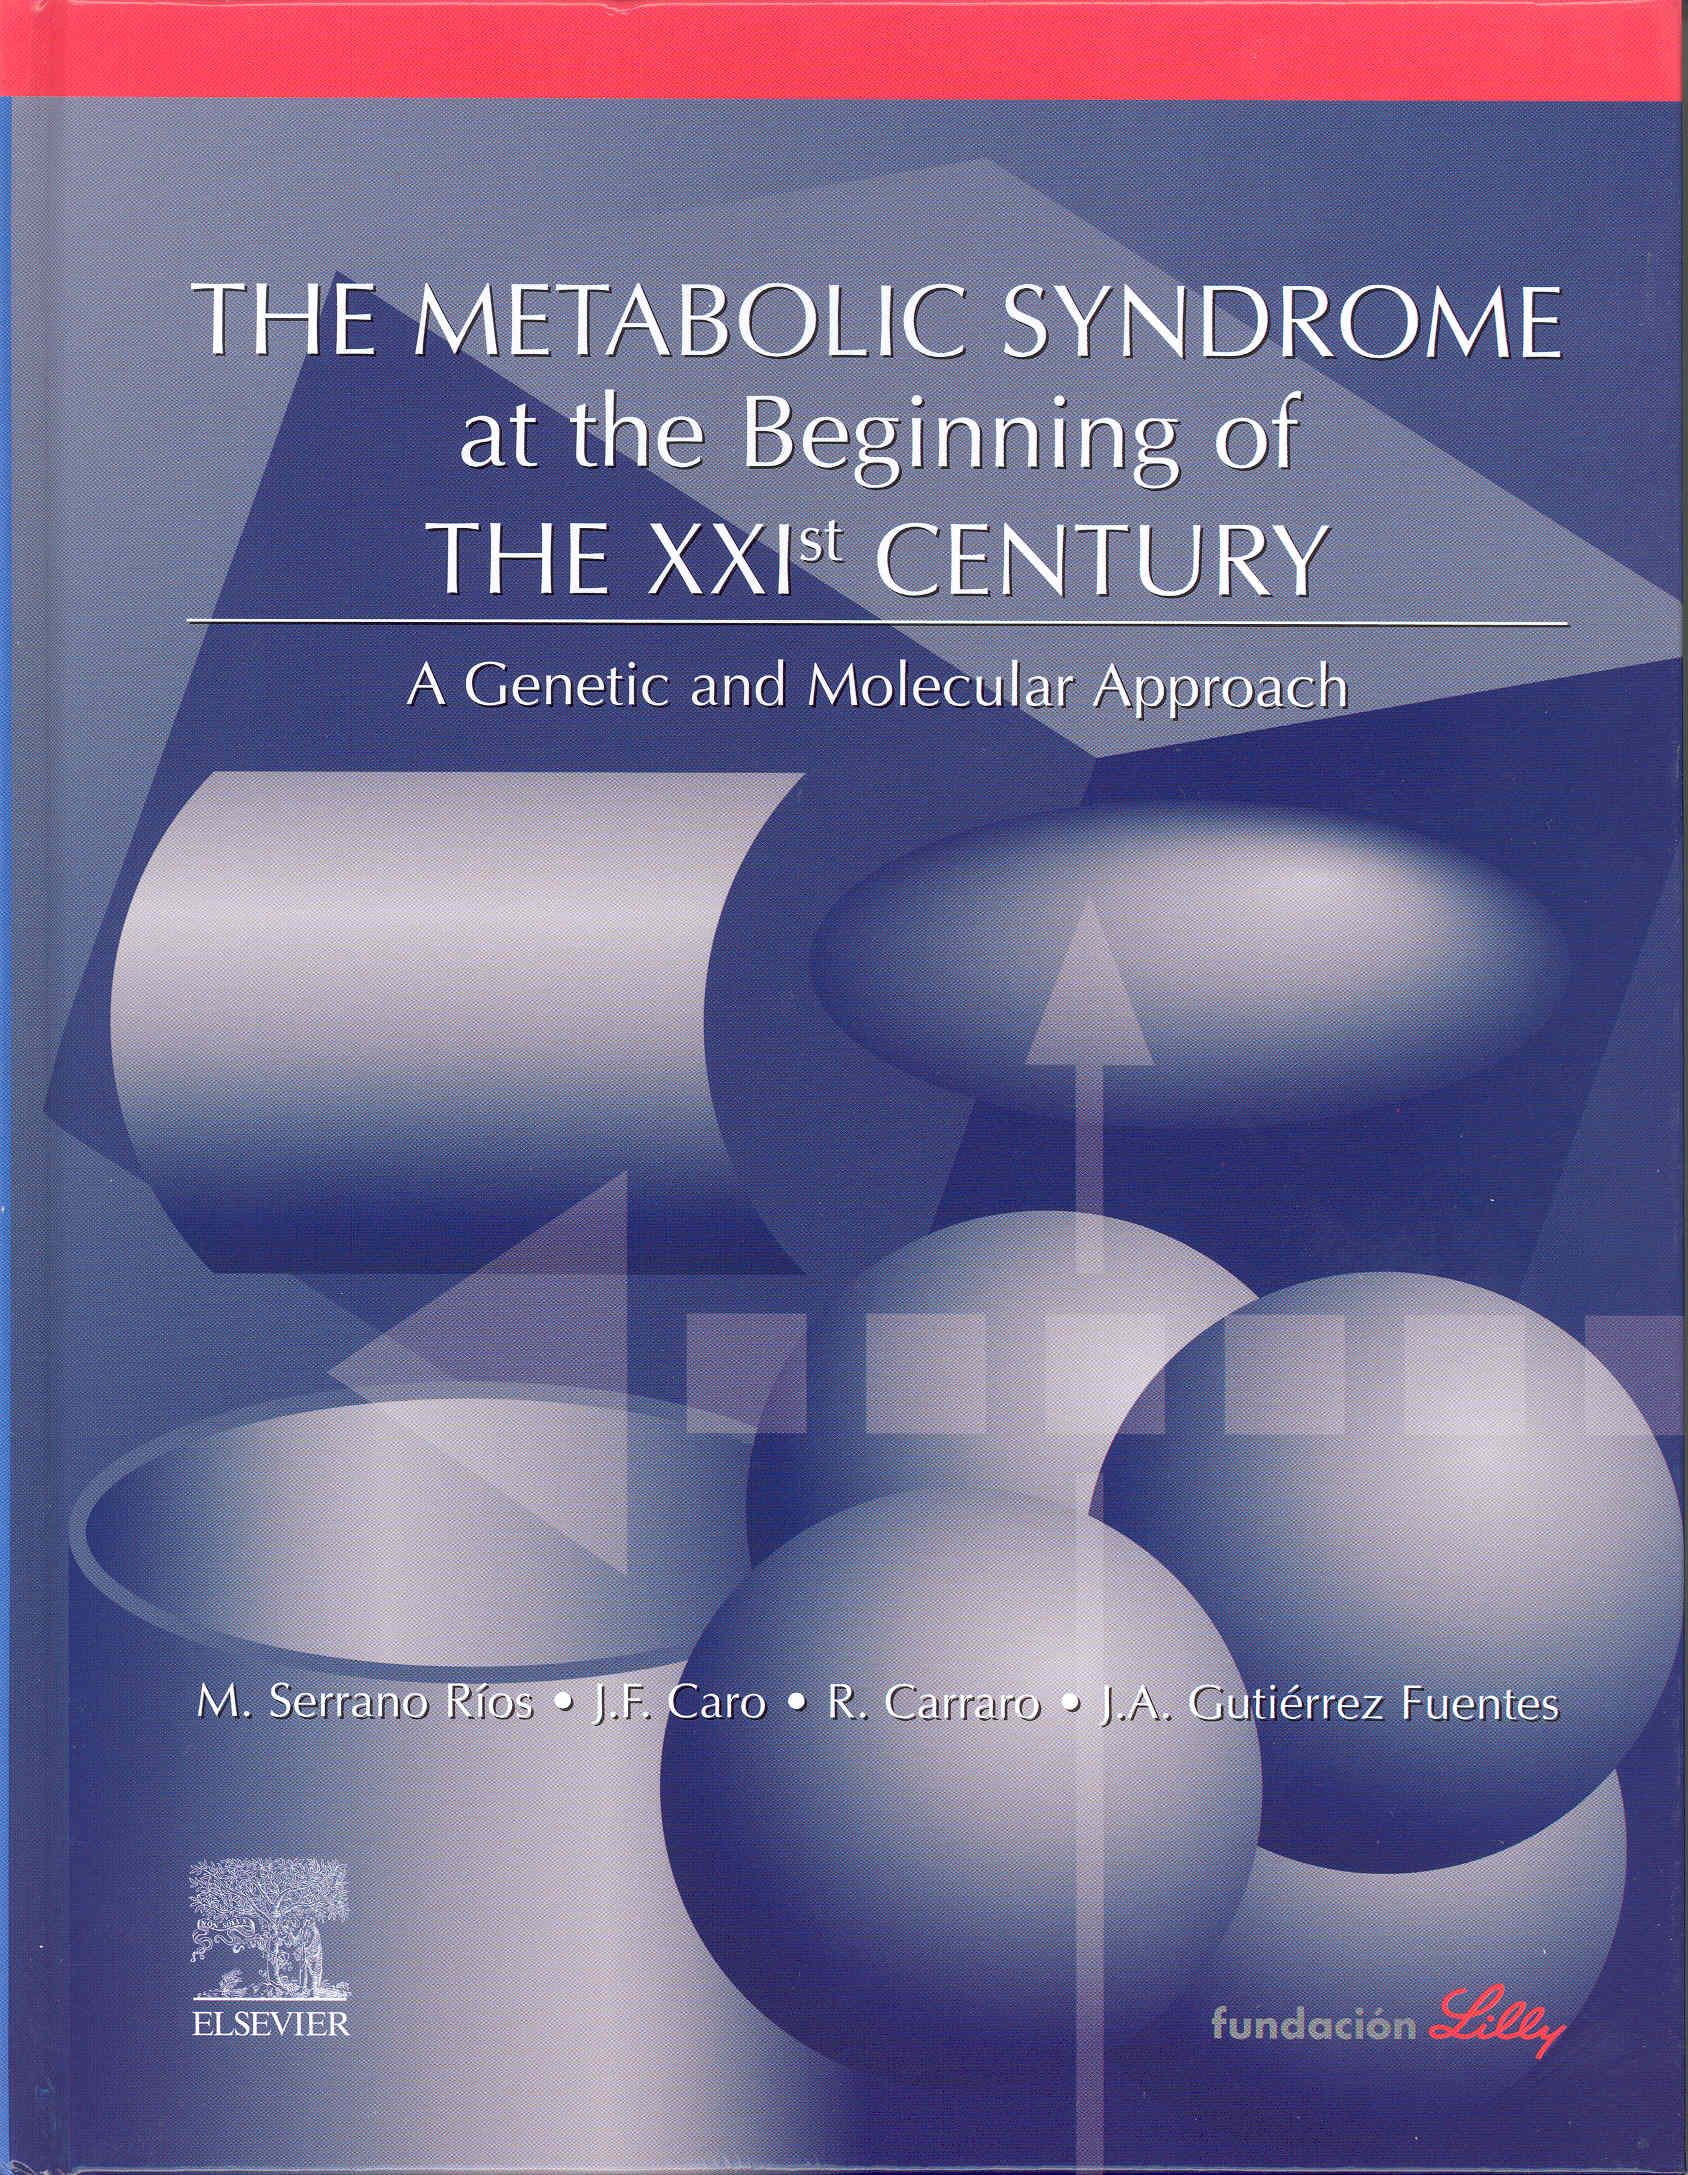 Portada de The Metabolic Syndrome at the beginning of the XXIst Century